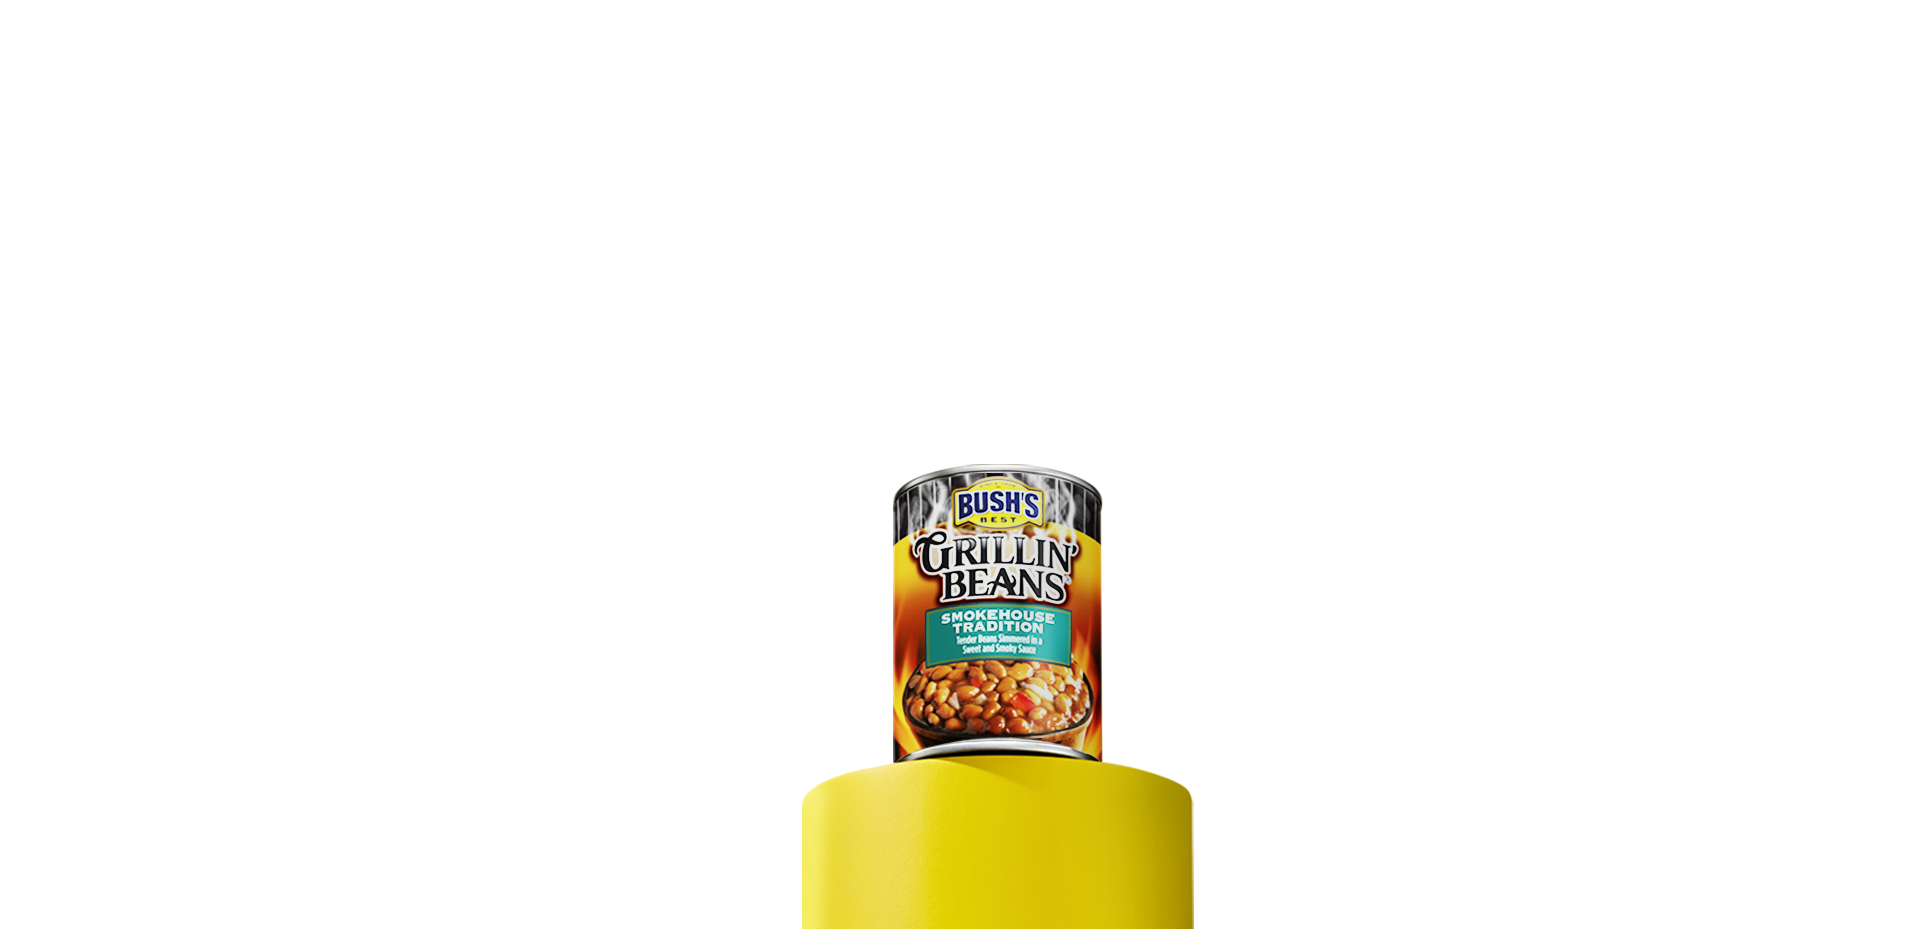 A can of Bush’s Best Grillin' Beans sitting on a yellow column